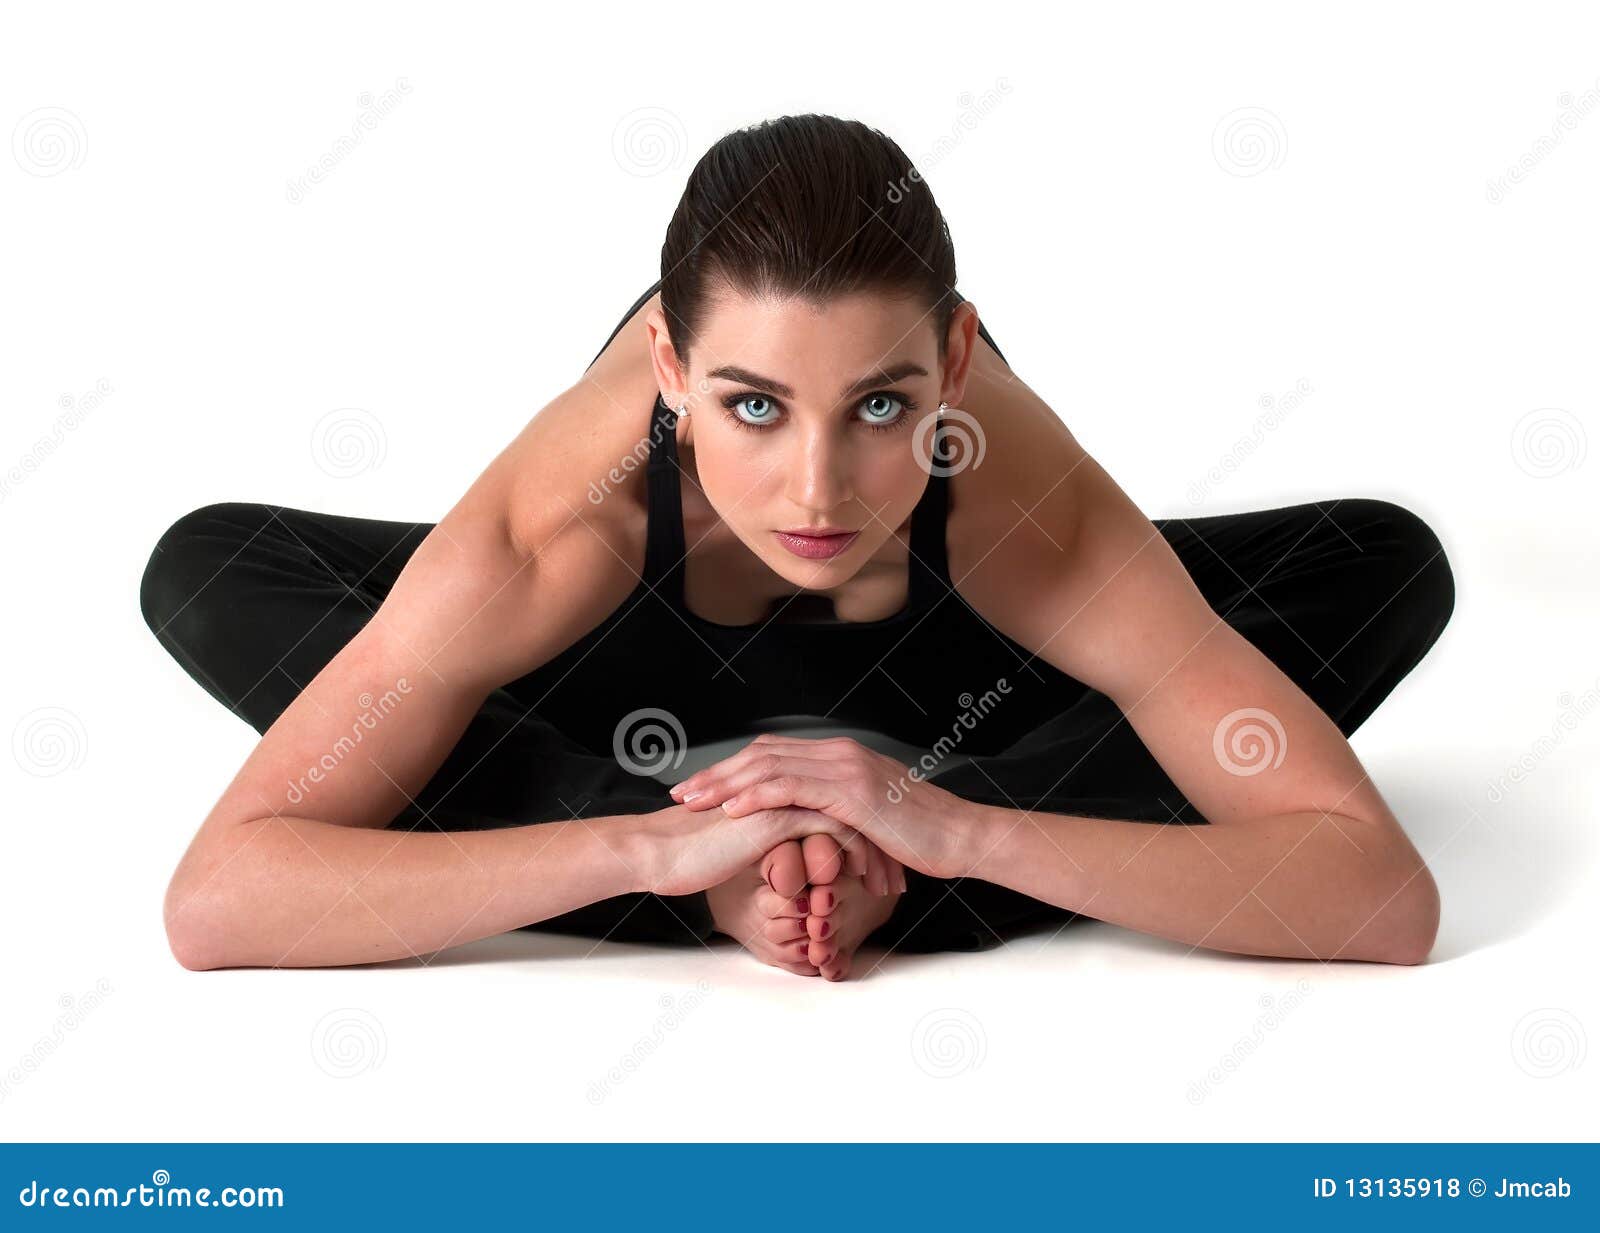 Yoga Poses Names: Over 380 Royalty-Free Licensable Stock